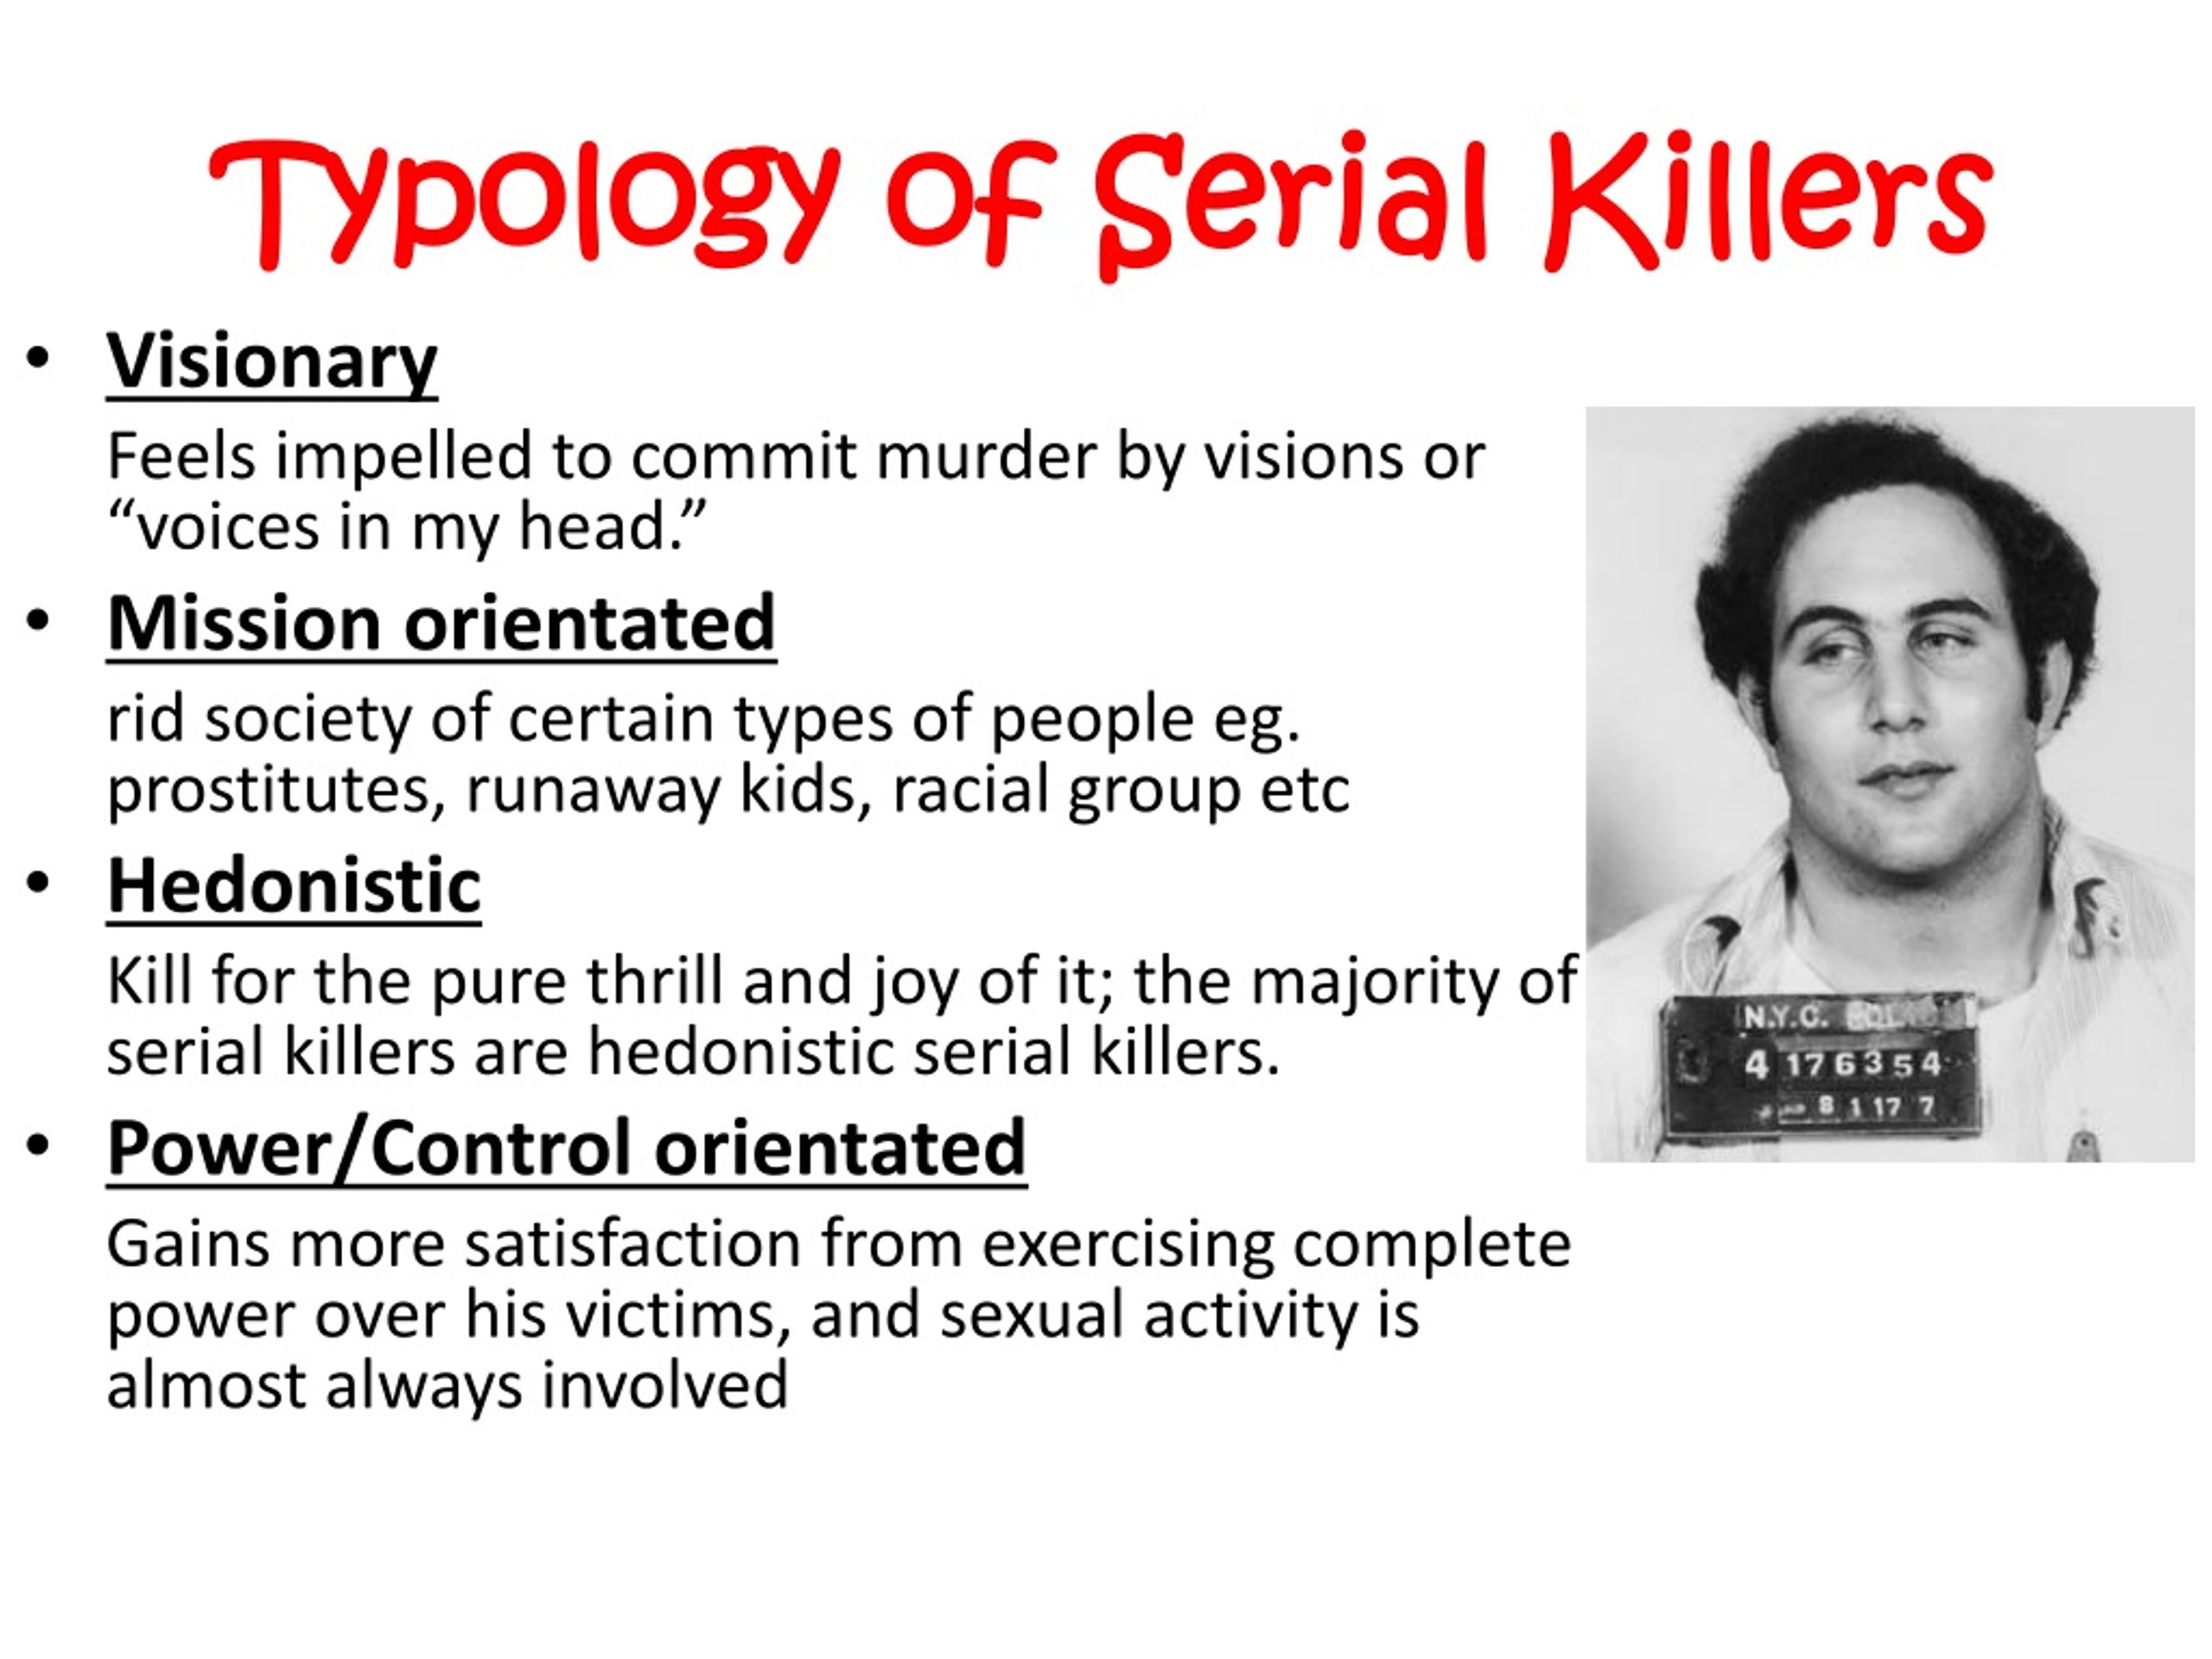 what signs are usually erial killers